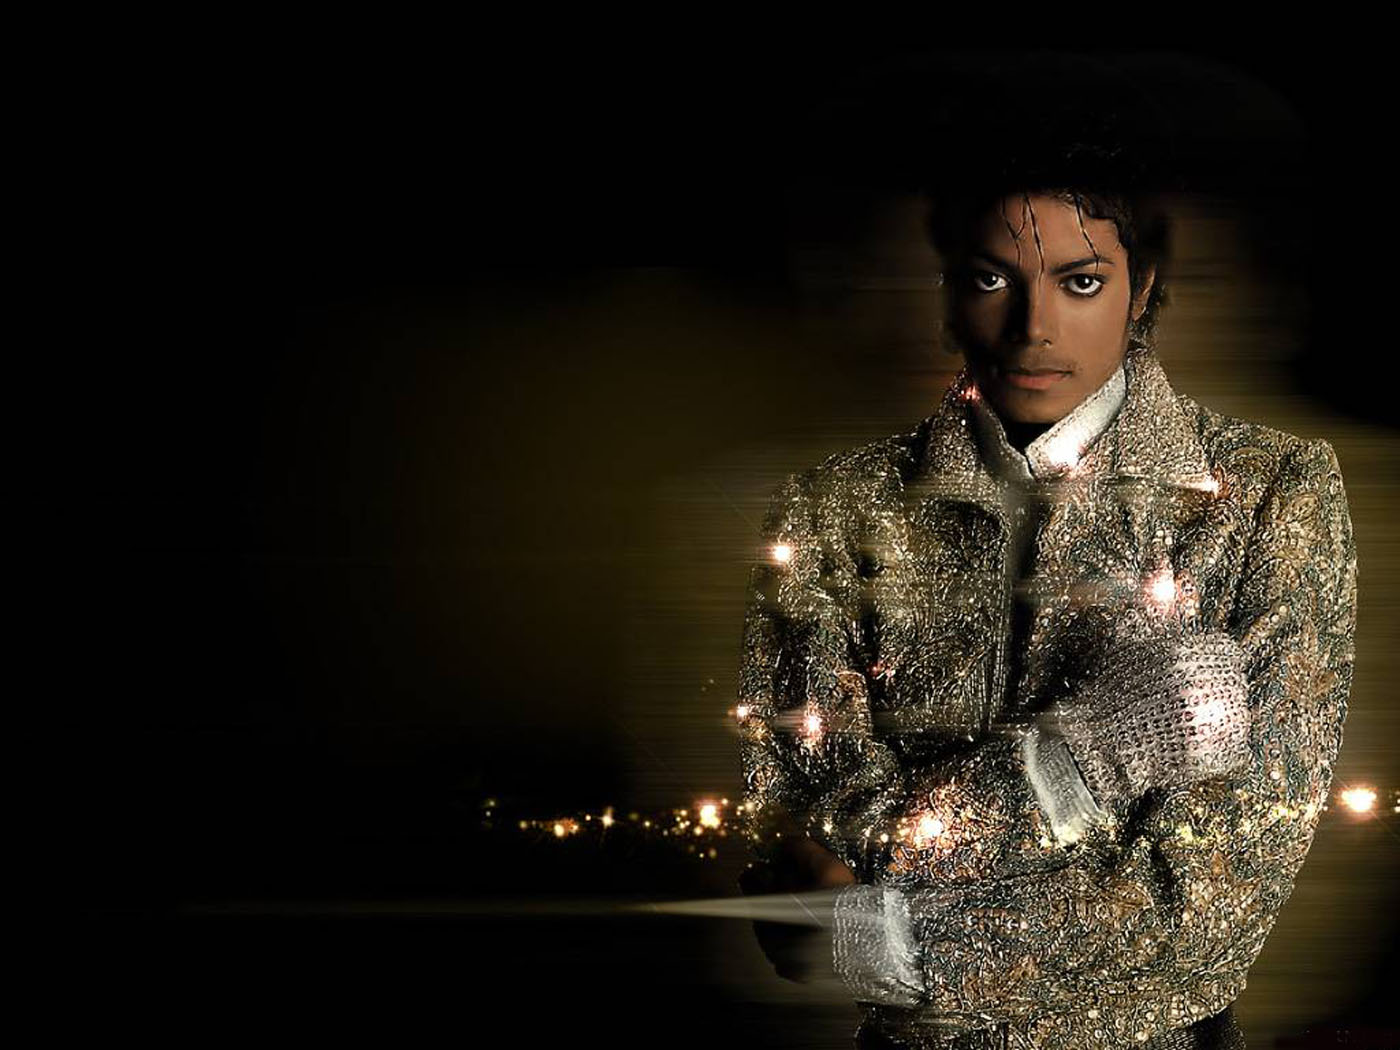 Wallpaper of Michael for fans of The Jackson family. 